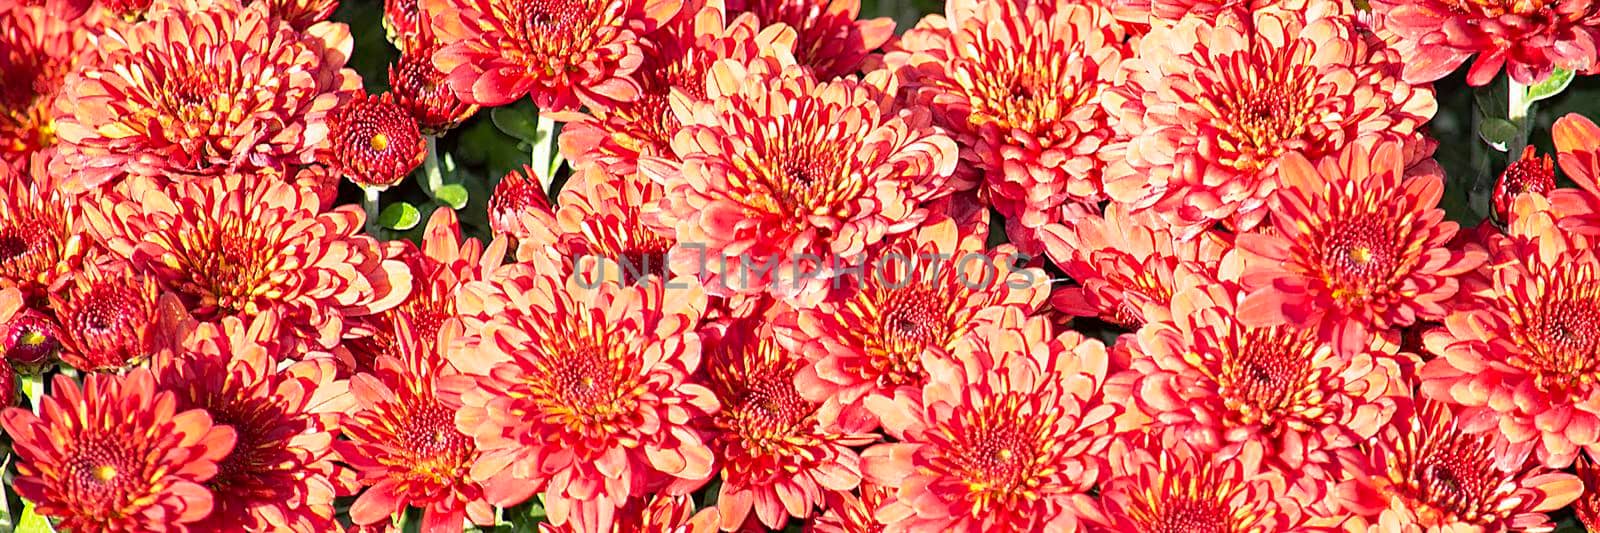 Yellow-orange chrysanthemums on a white background. Front view, gift card texture by Essffes